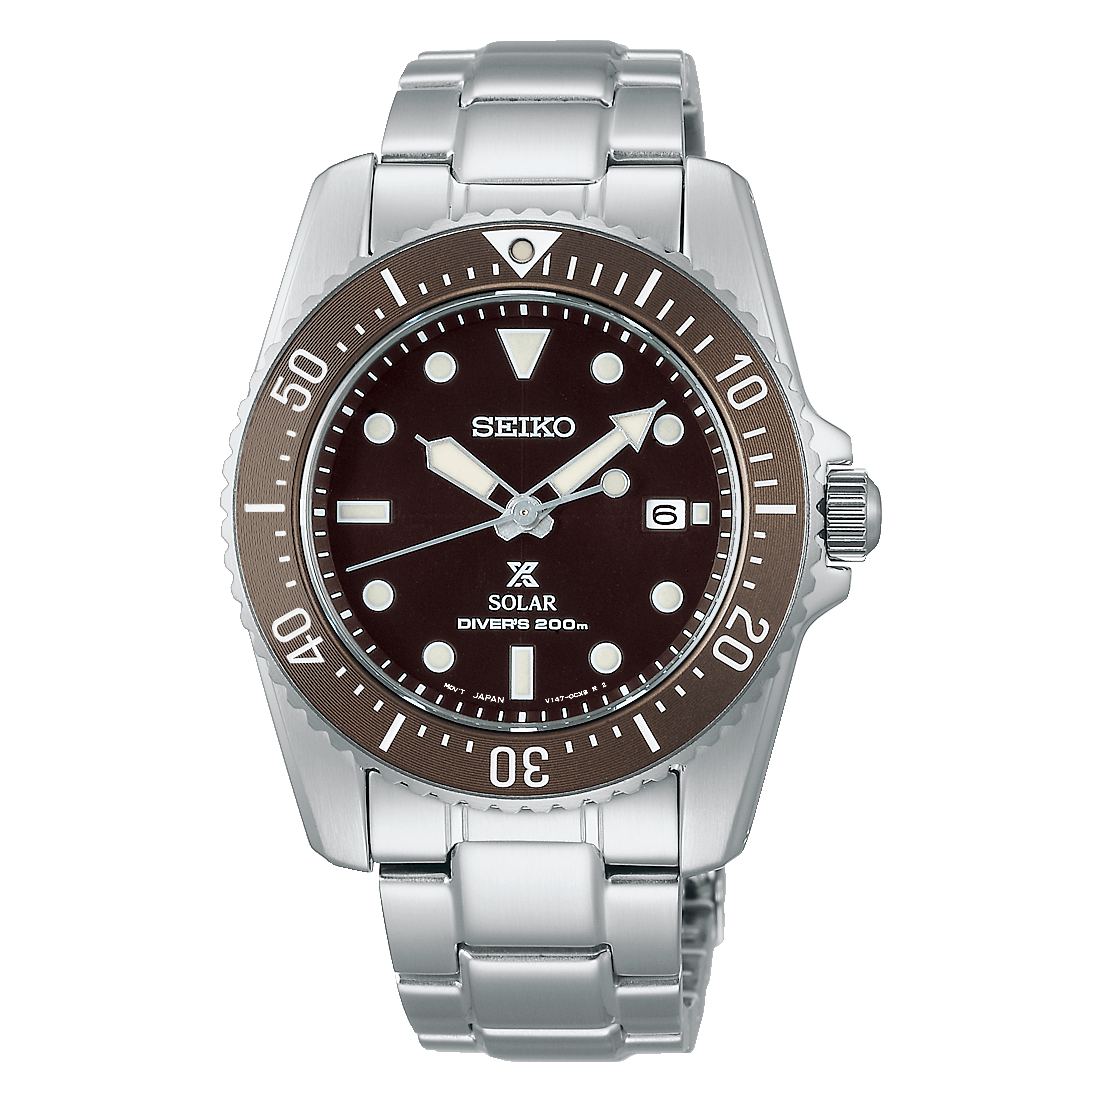 Seiko Watch Company - The Watch Collectors' Club